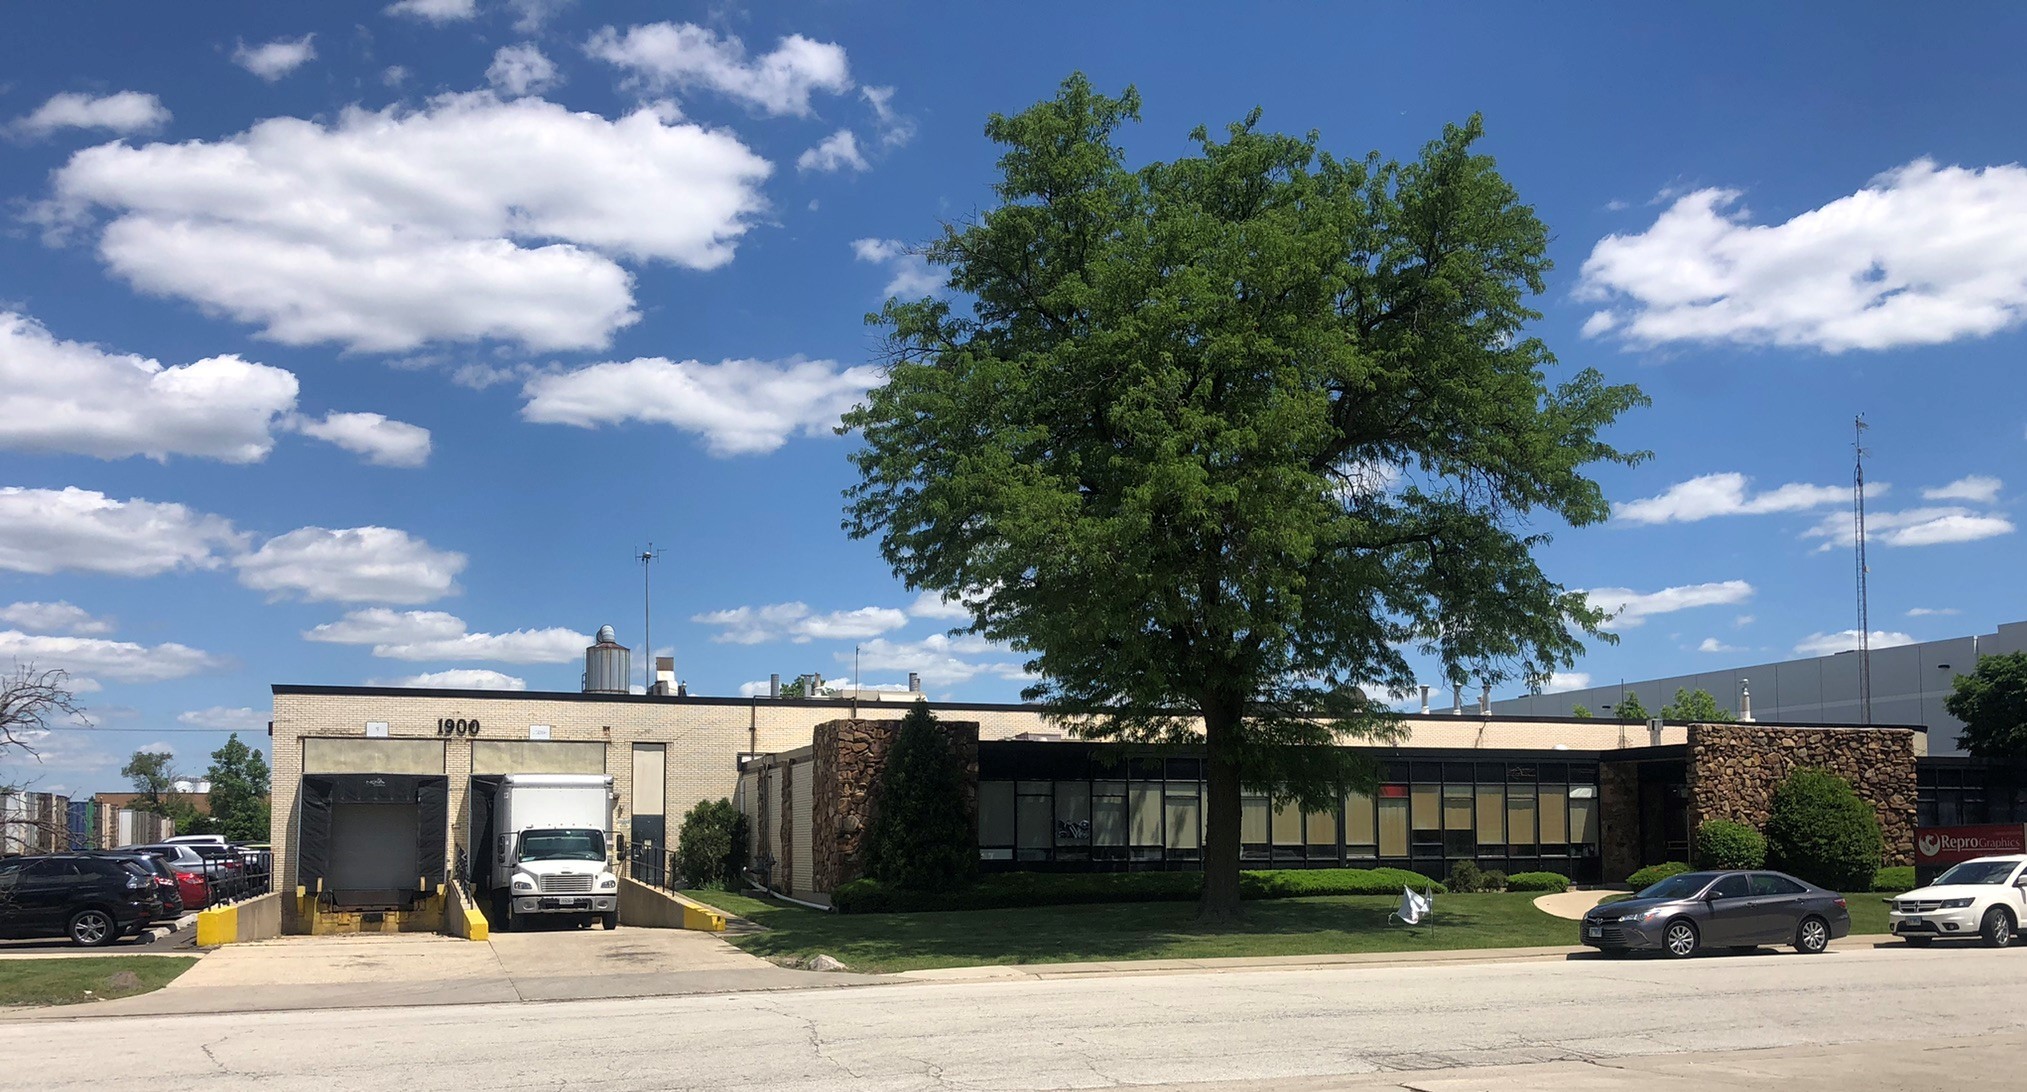 Street view of tan Industrial warehouse with two loading docks and a large oak tree, Cawley CRE